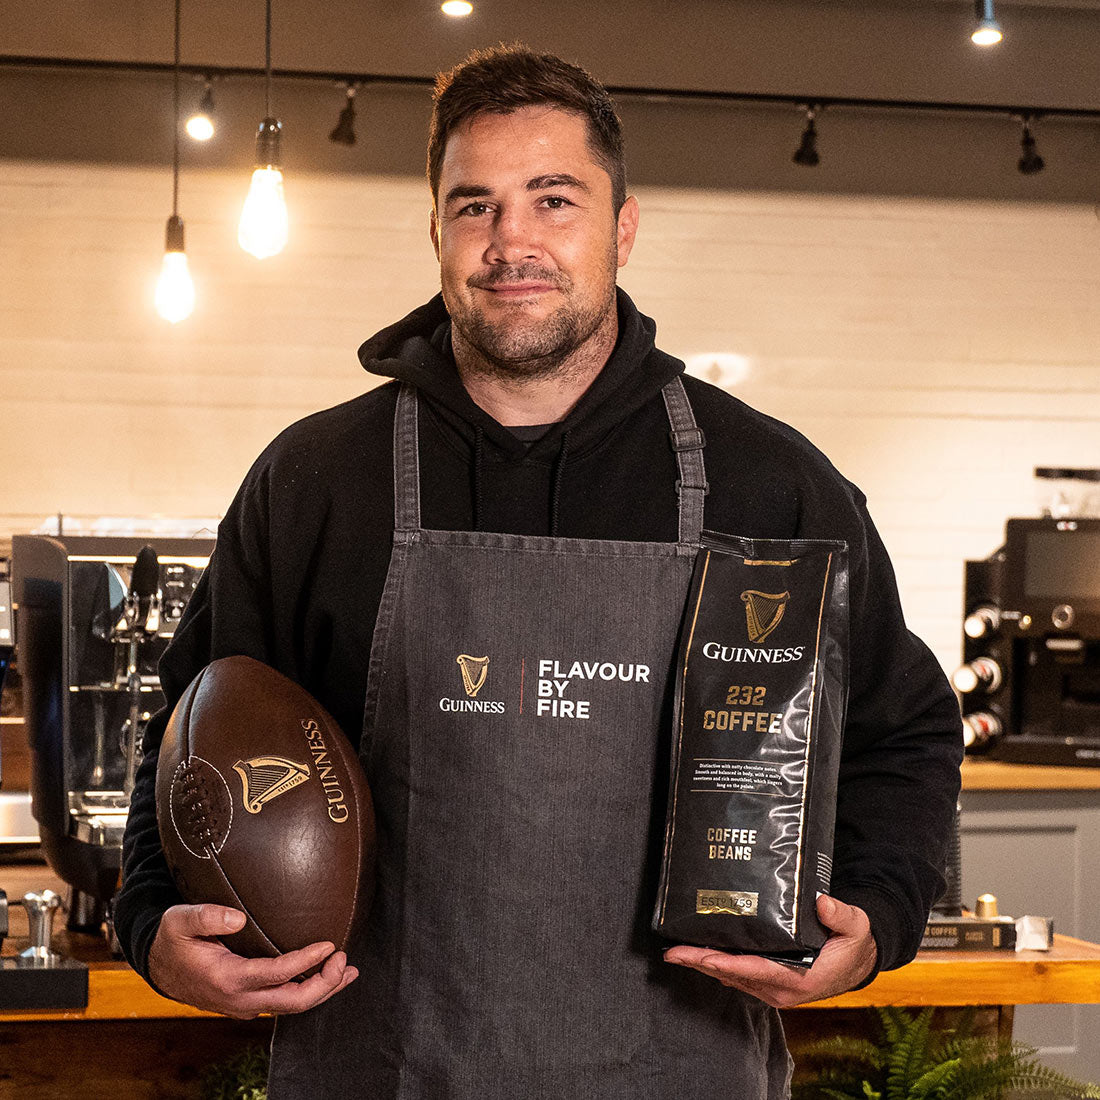 A man in an apron holding a football and a bag of Guinness Coffee Beans 227g.